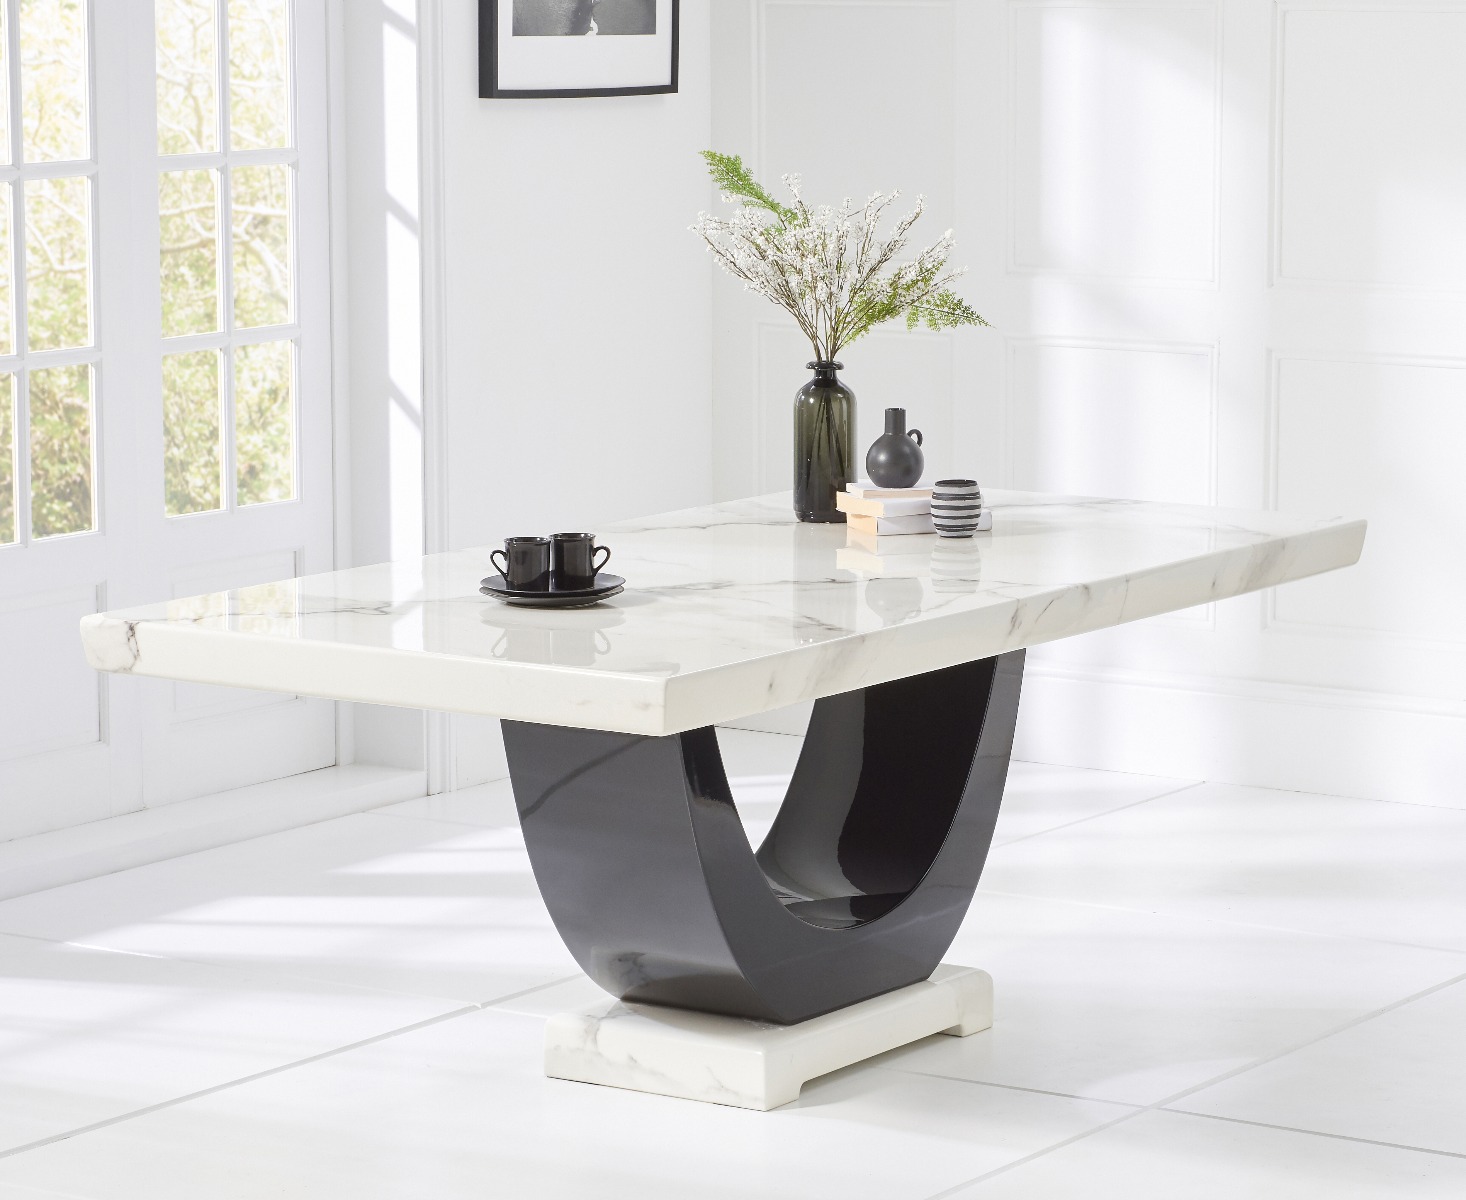 Photo 3 of Novara 170cm white and black pedestal marble dining table with 6 cream francesca chairs